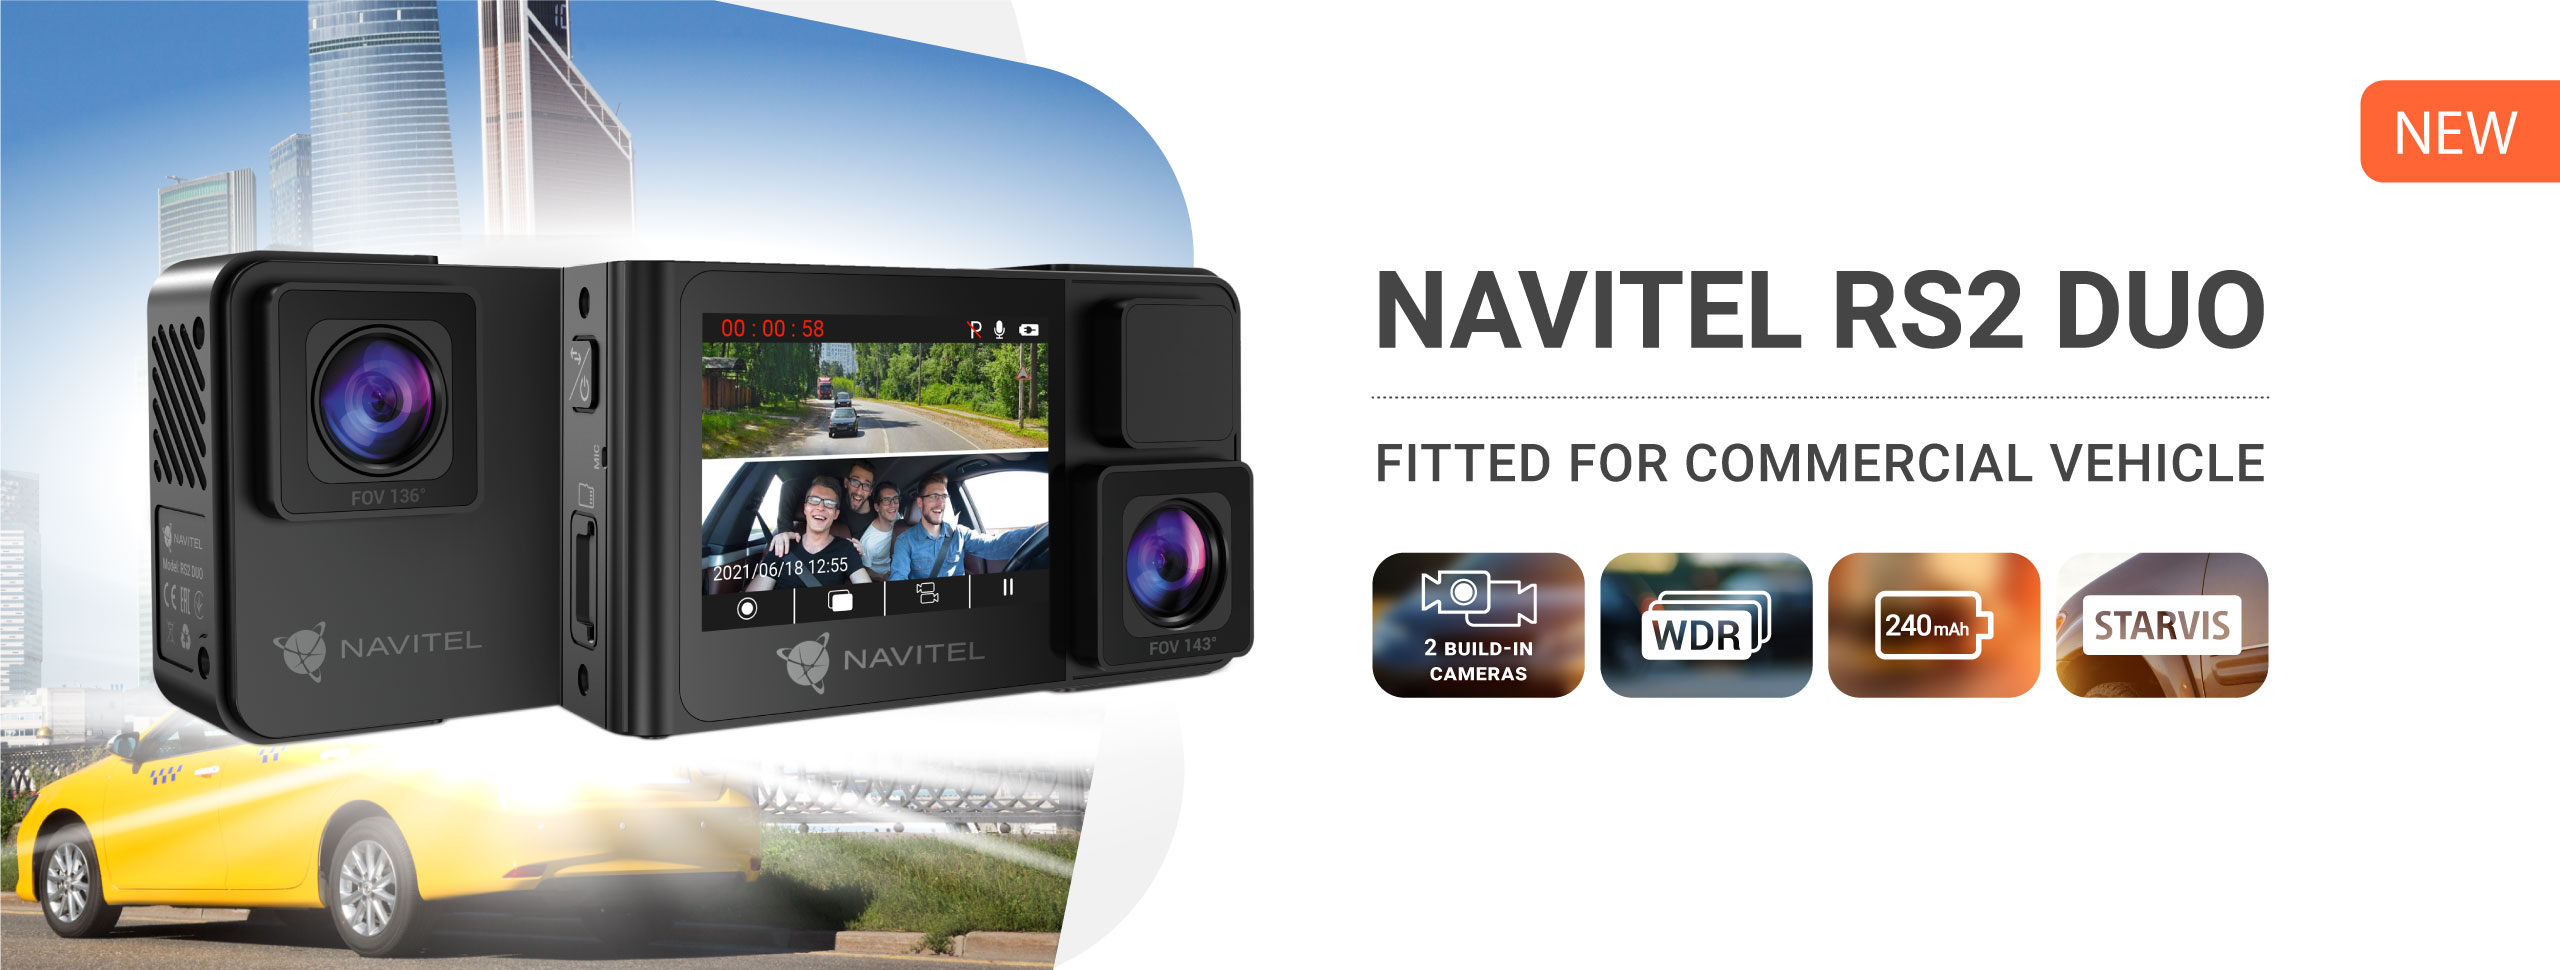 Two-channel dashcam NAVITEL RS2 DUO